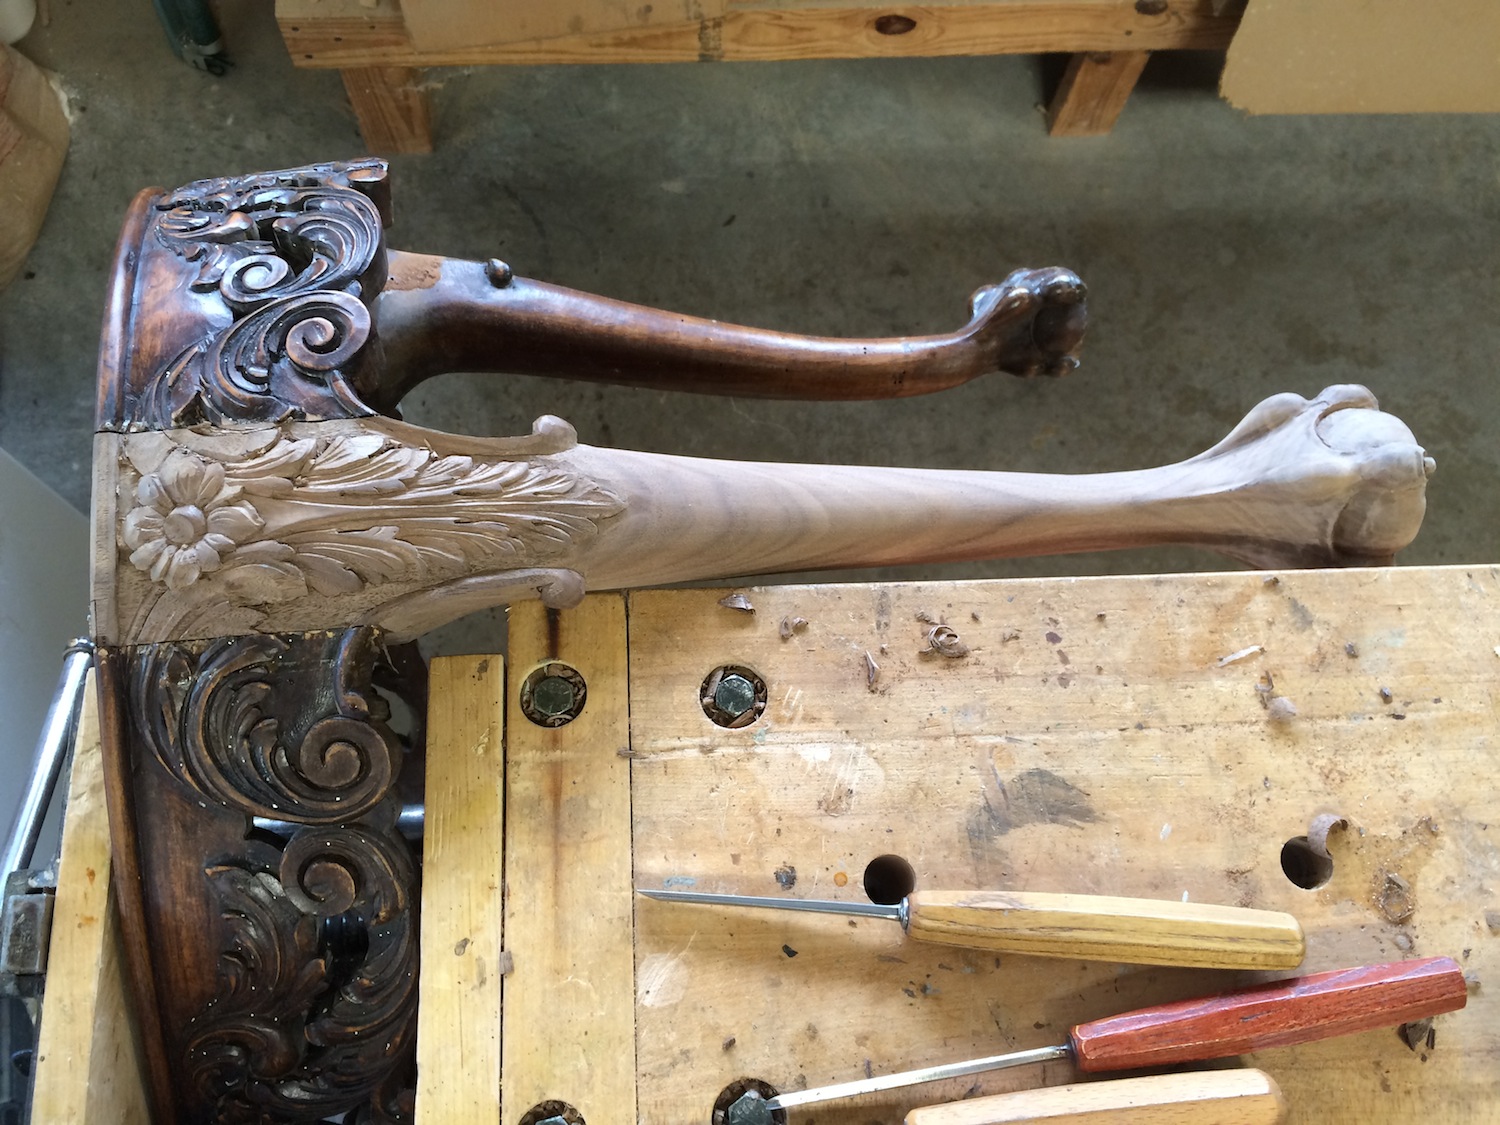   To replace the broken leg on this bench a new leg had to be carved and fitted to the existing joinery, then the decorative details merged with those of the apron.&nbsp; The new finish was applied in steps to achieve the proper color, shading and di